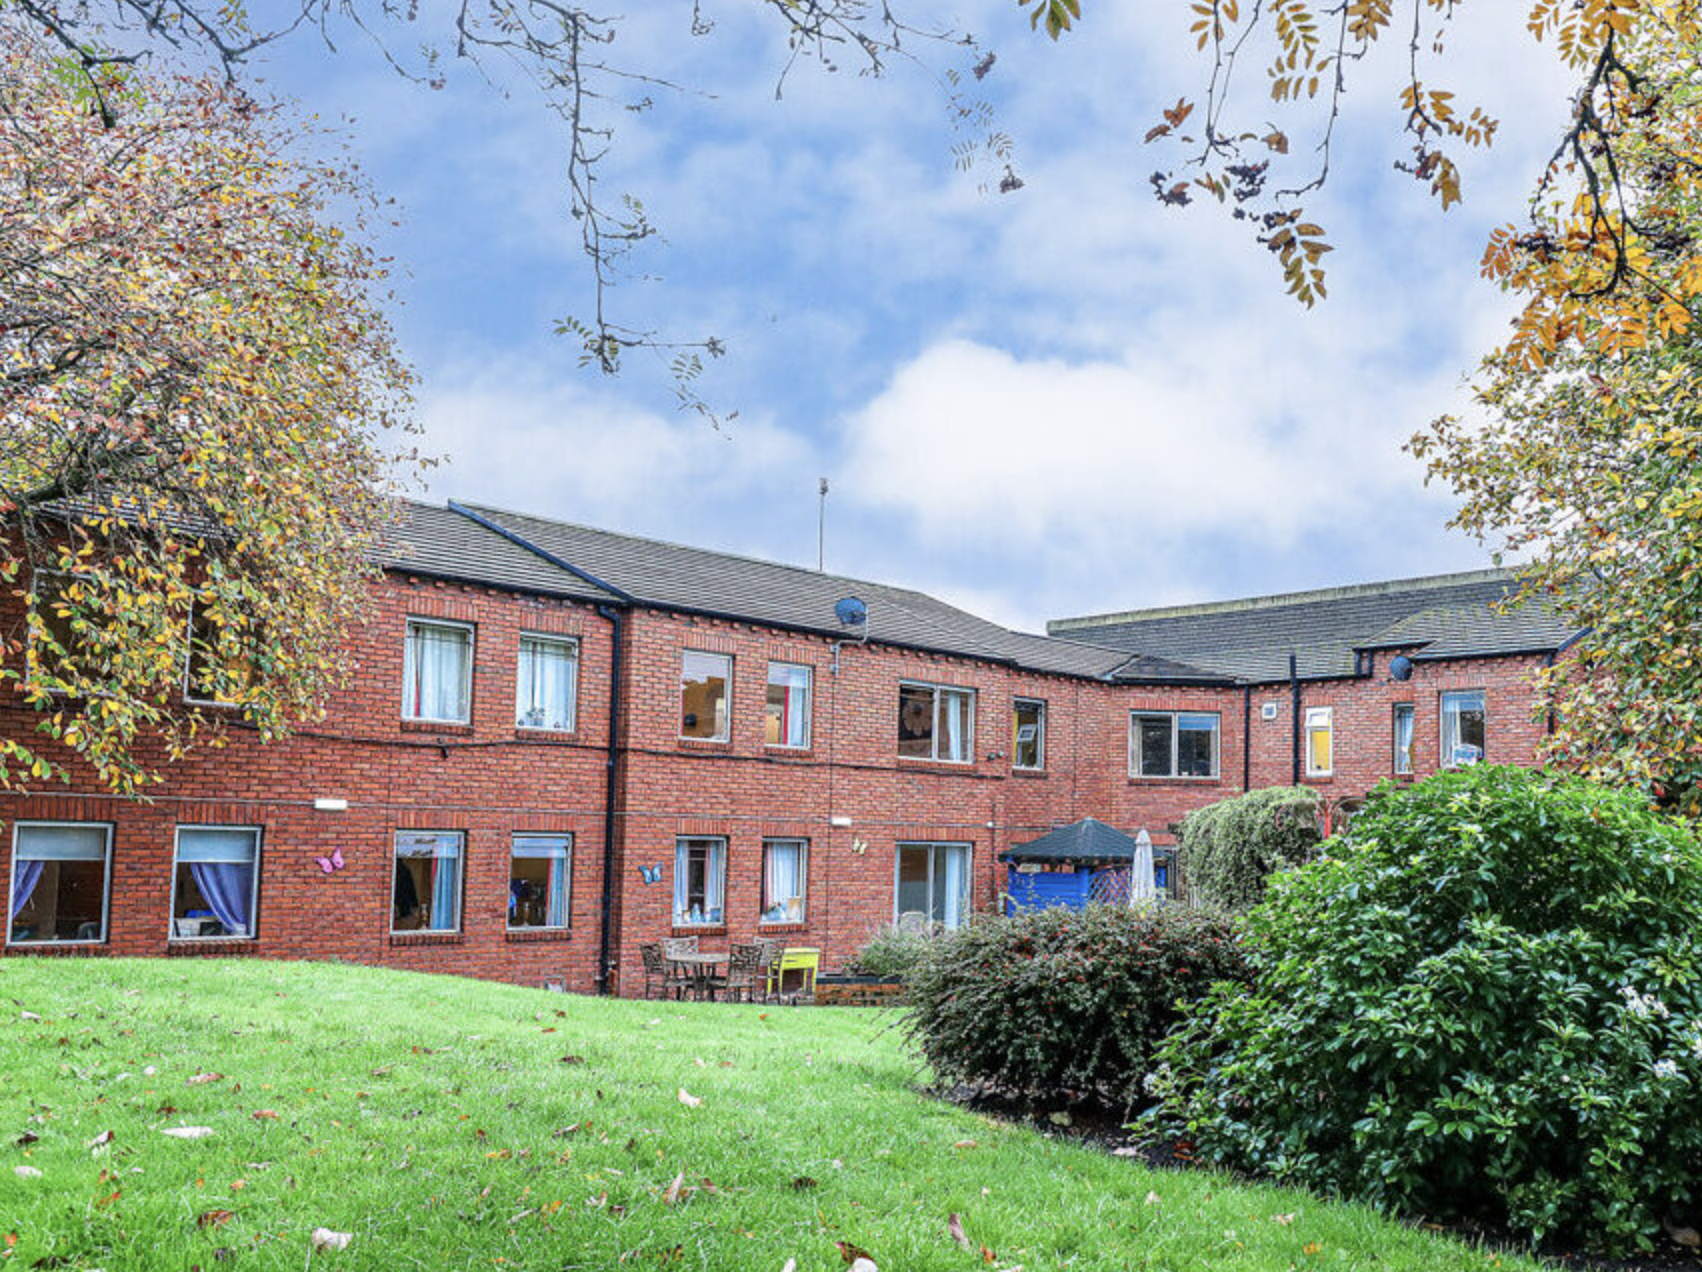 Exterior of Crossways care home in Northwich, Cheshire